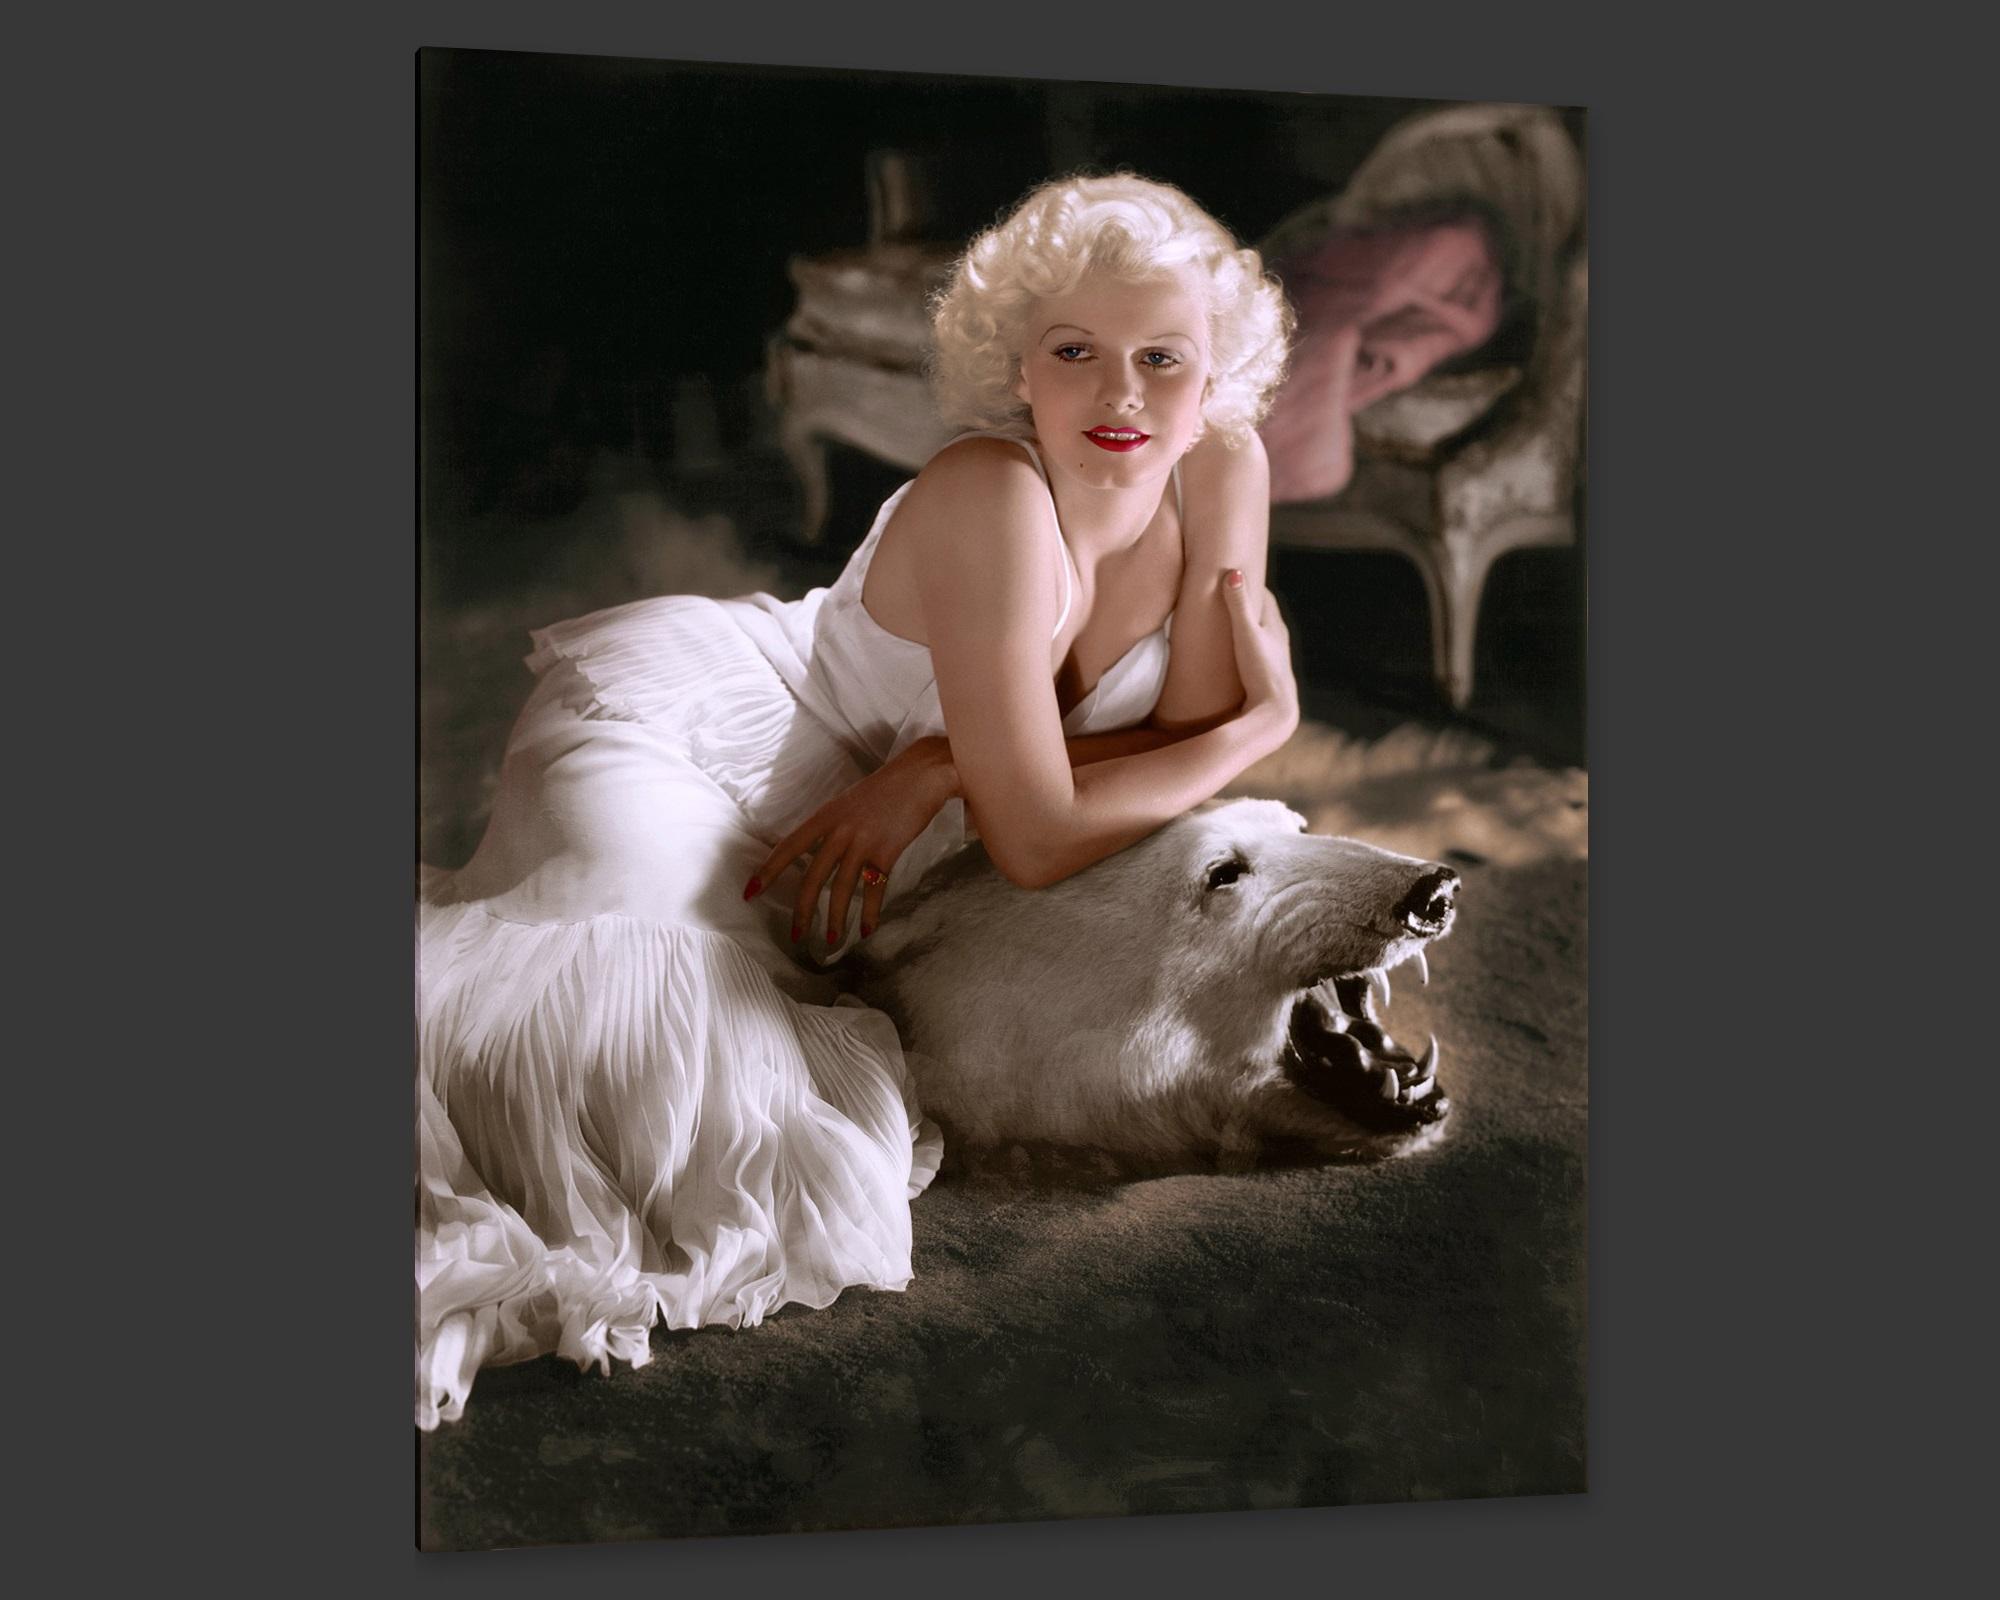 American Jean Harlow, after Art Deco Era Vintage Photography by George Hurrell For Sale